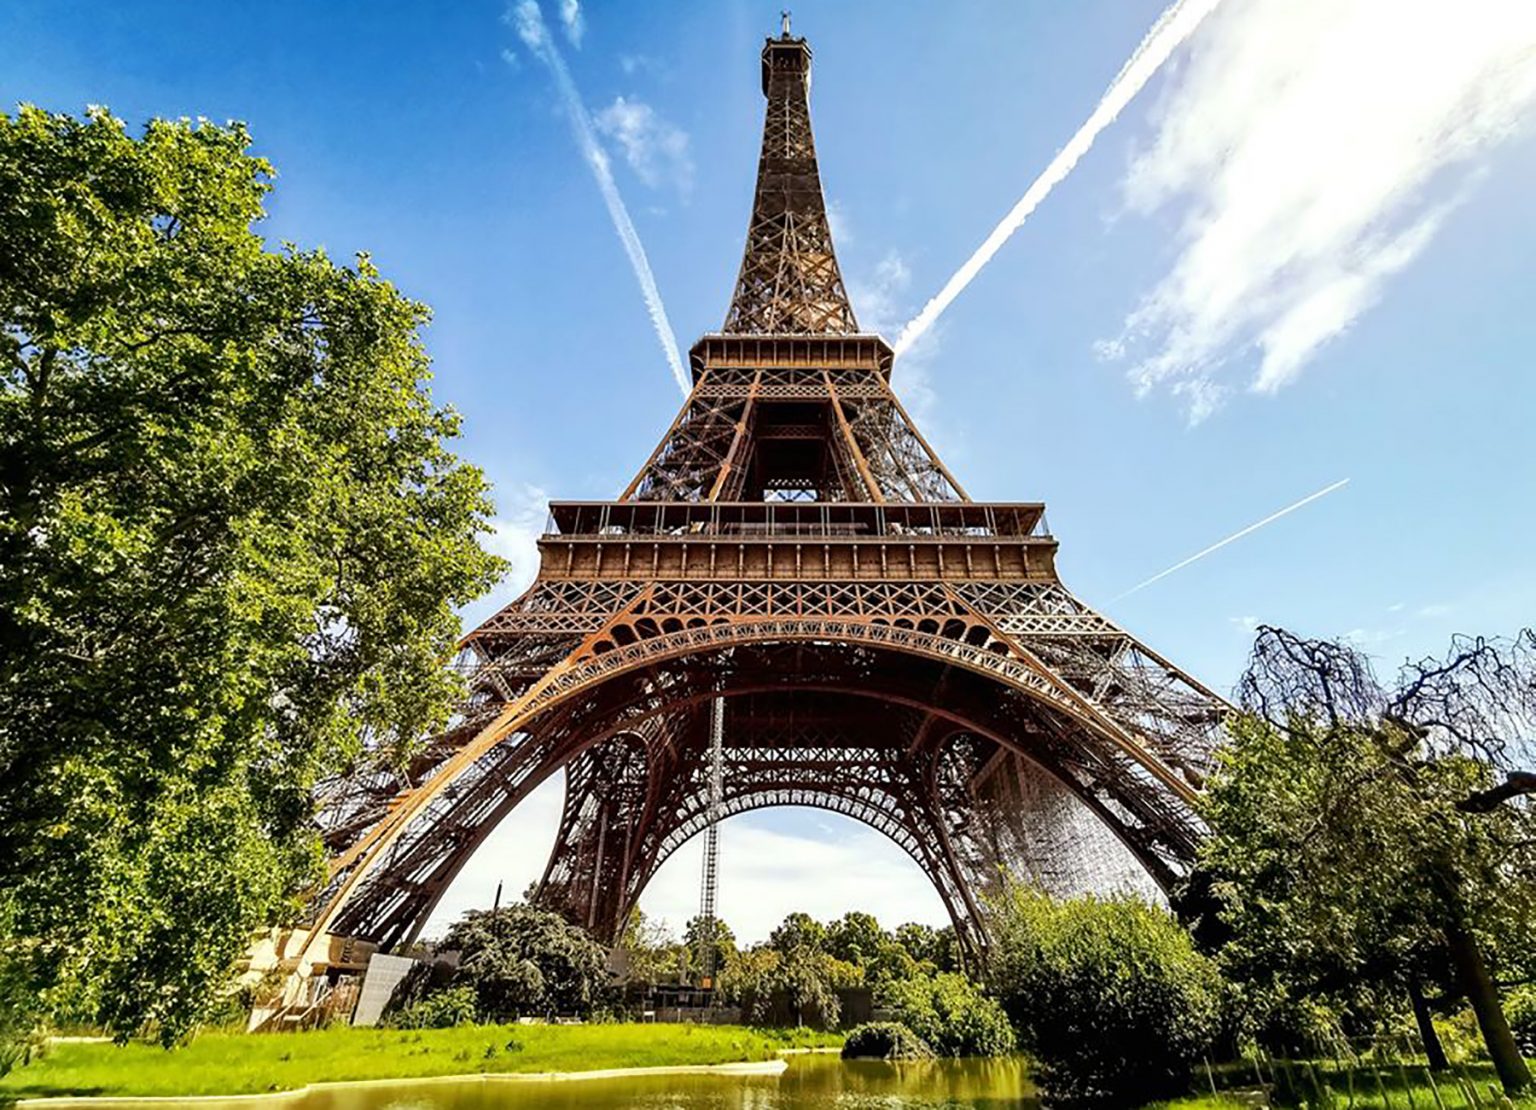 The Eiffel Tower can be 15 cm taller during the summer